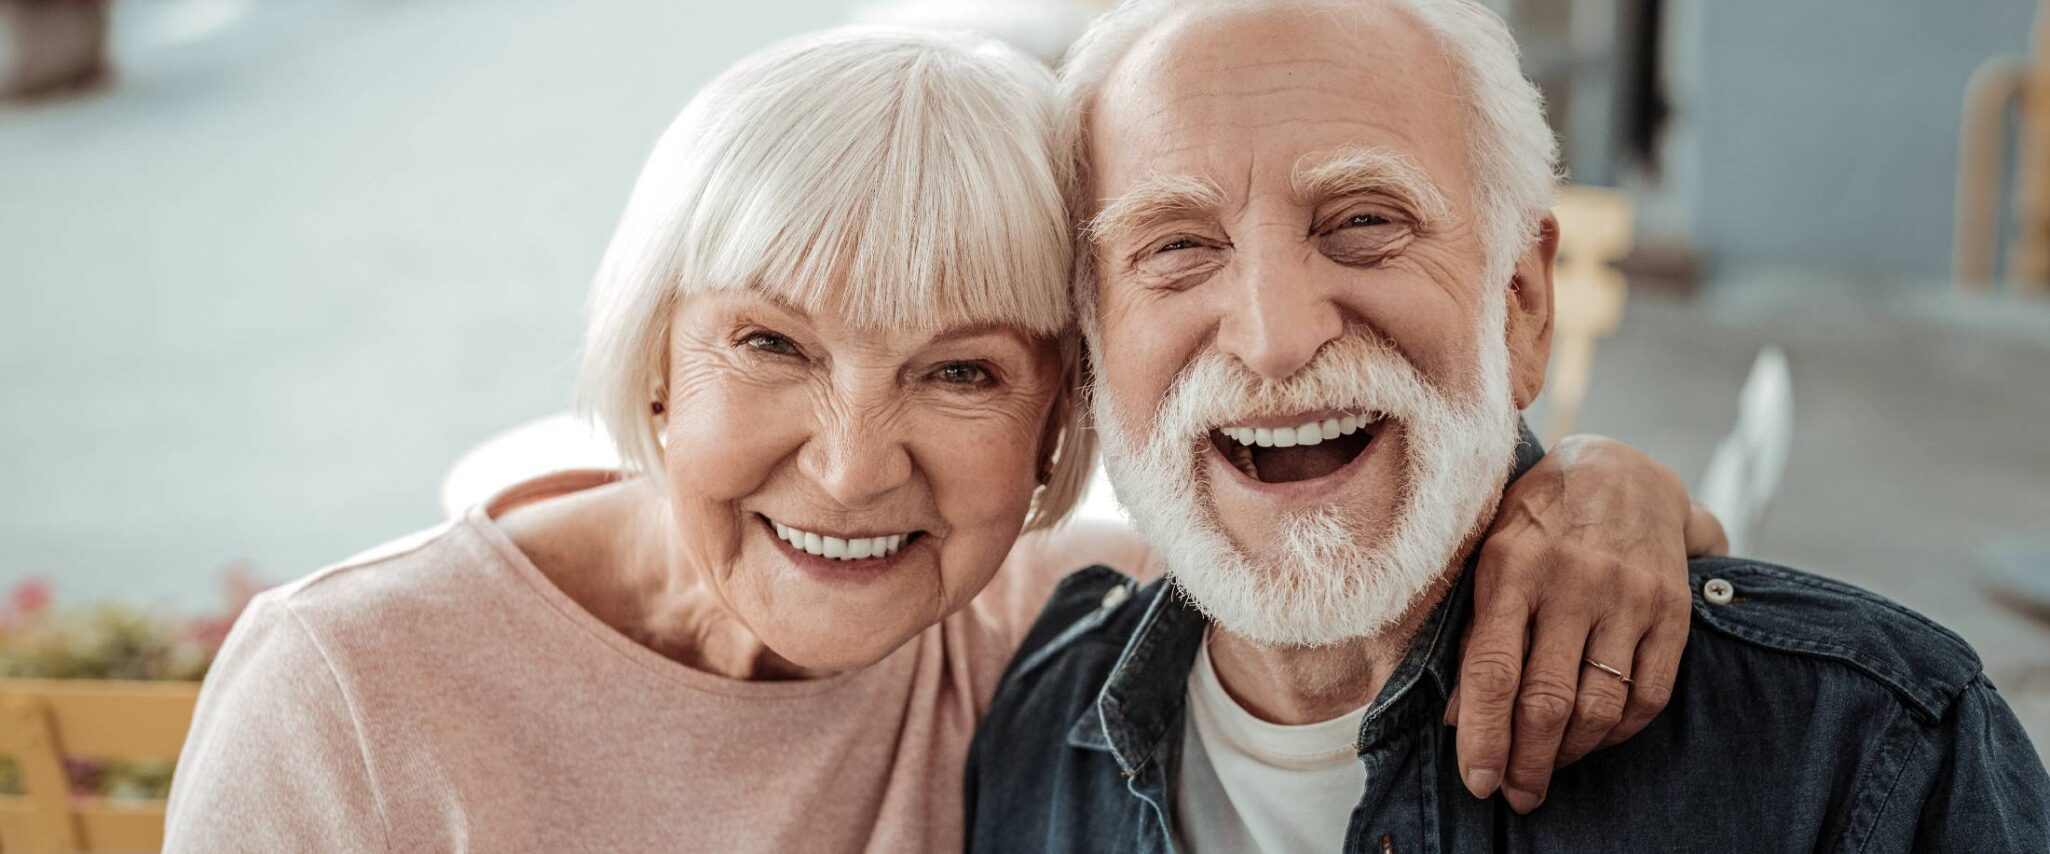 senior couple in senior living smiling and laughing at the camera